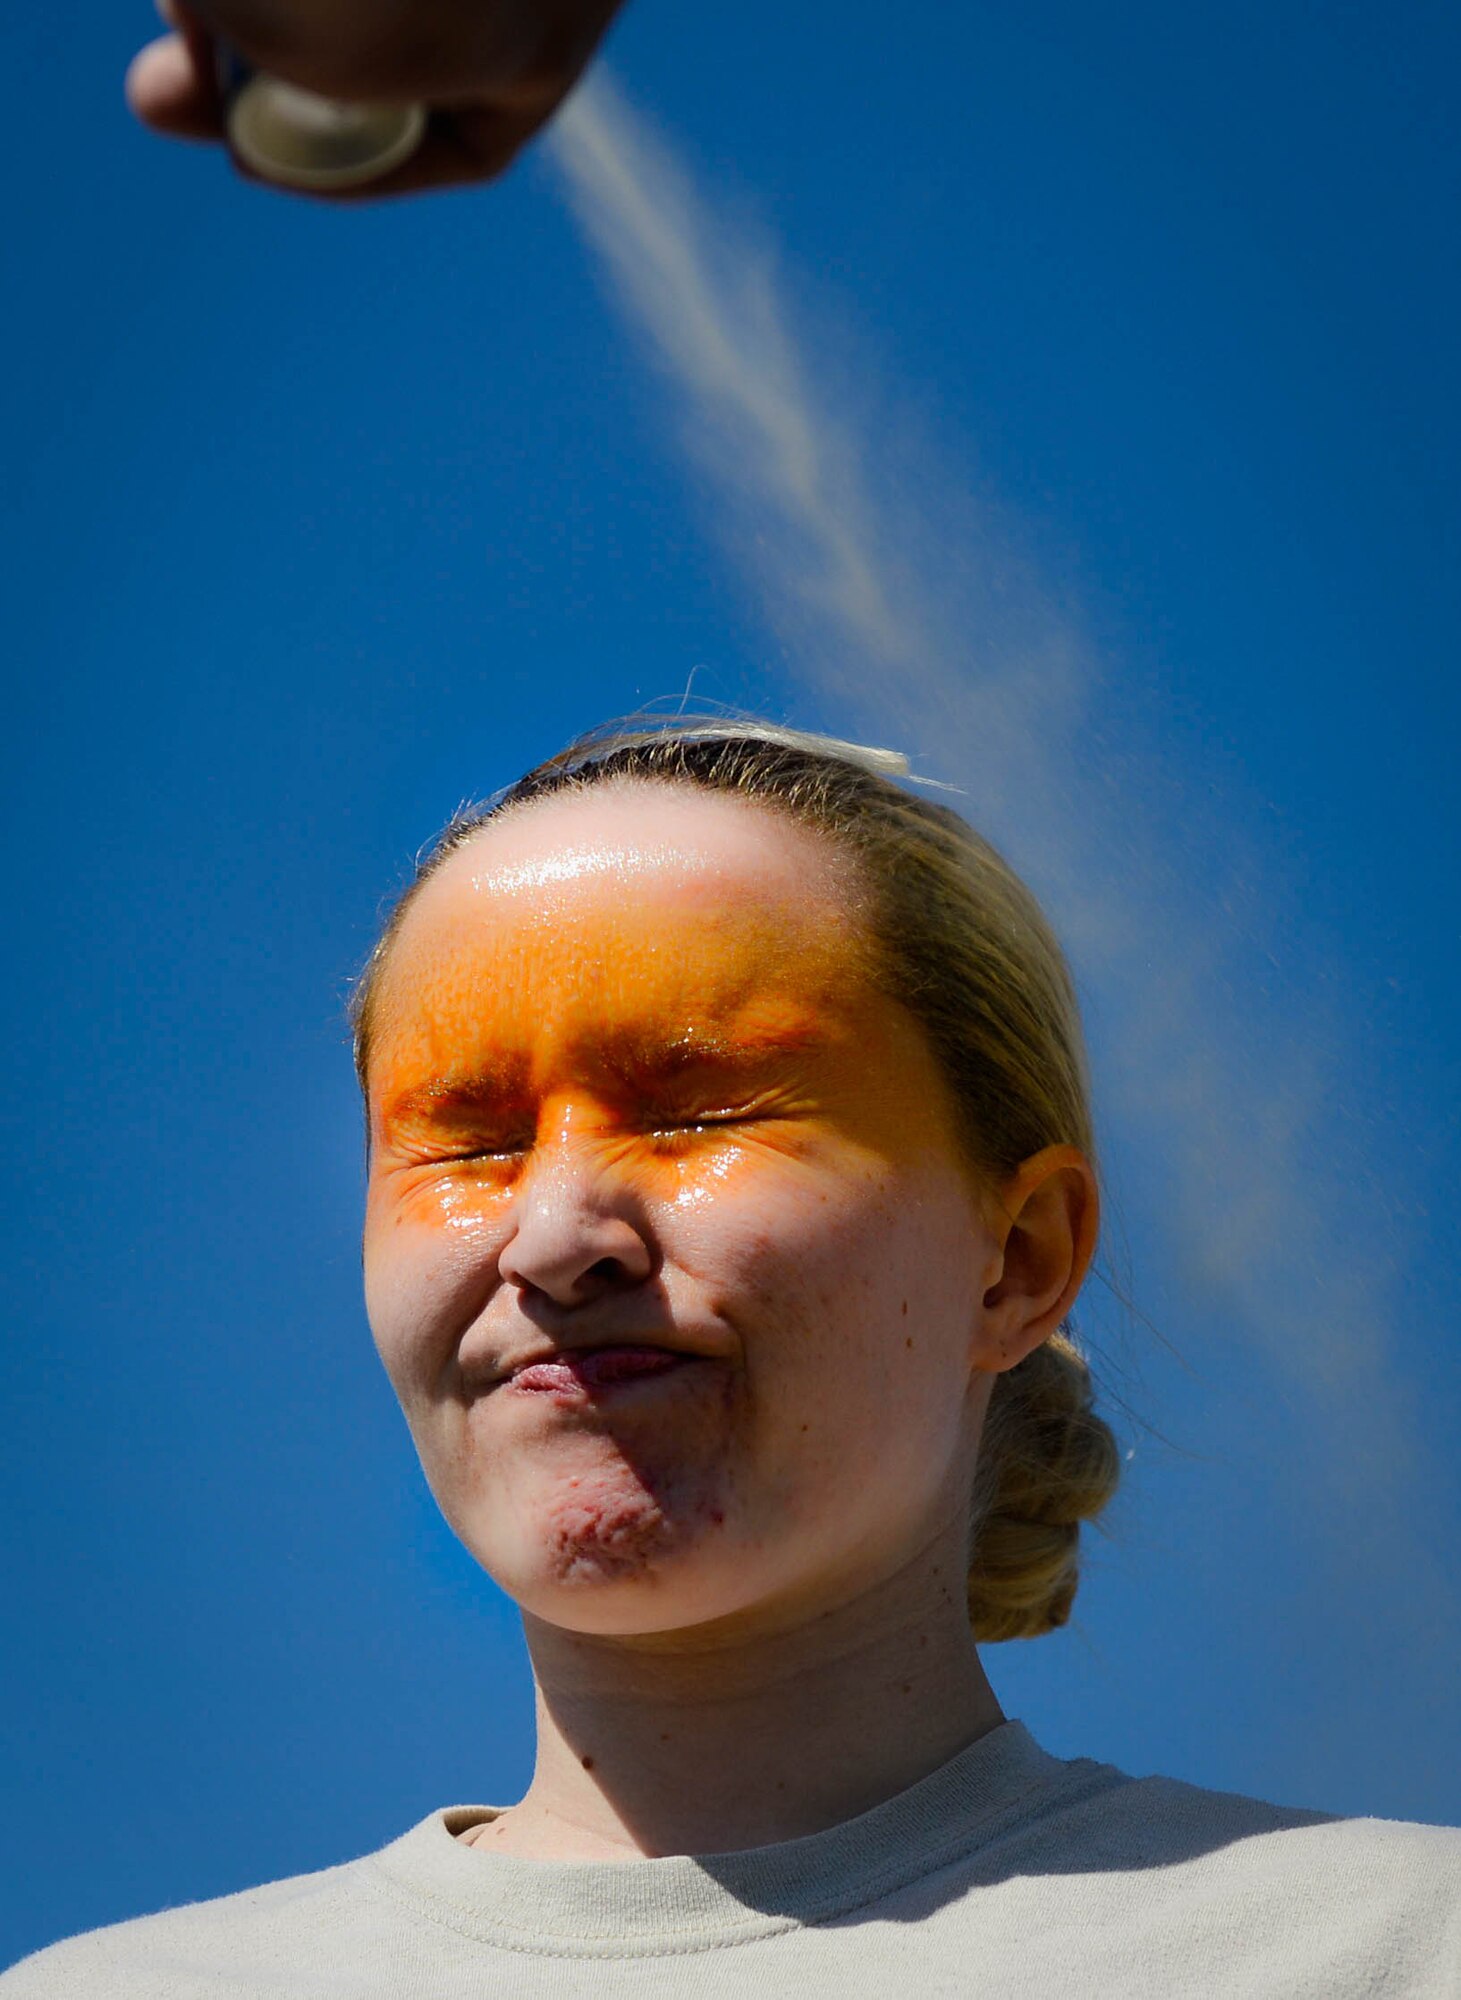 U.S. Air Force Airman 1st Class Hannah McCoy, 20th Security Forces Squadron journeyman, gets pepper sprayed during training at Shaw Air Force Base, S.C., Feb. 29, 2016. During orientation training all new security forces Airmen experience pepper spray to better understand its effects. (U.S. Air Force photo by Senior Airman Jensen Stidham)